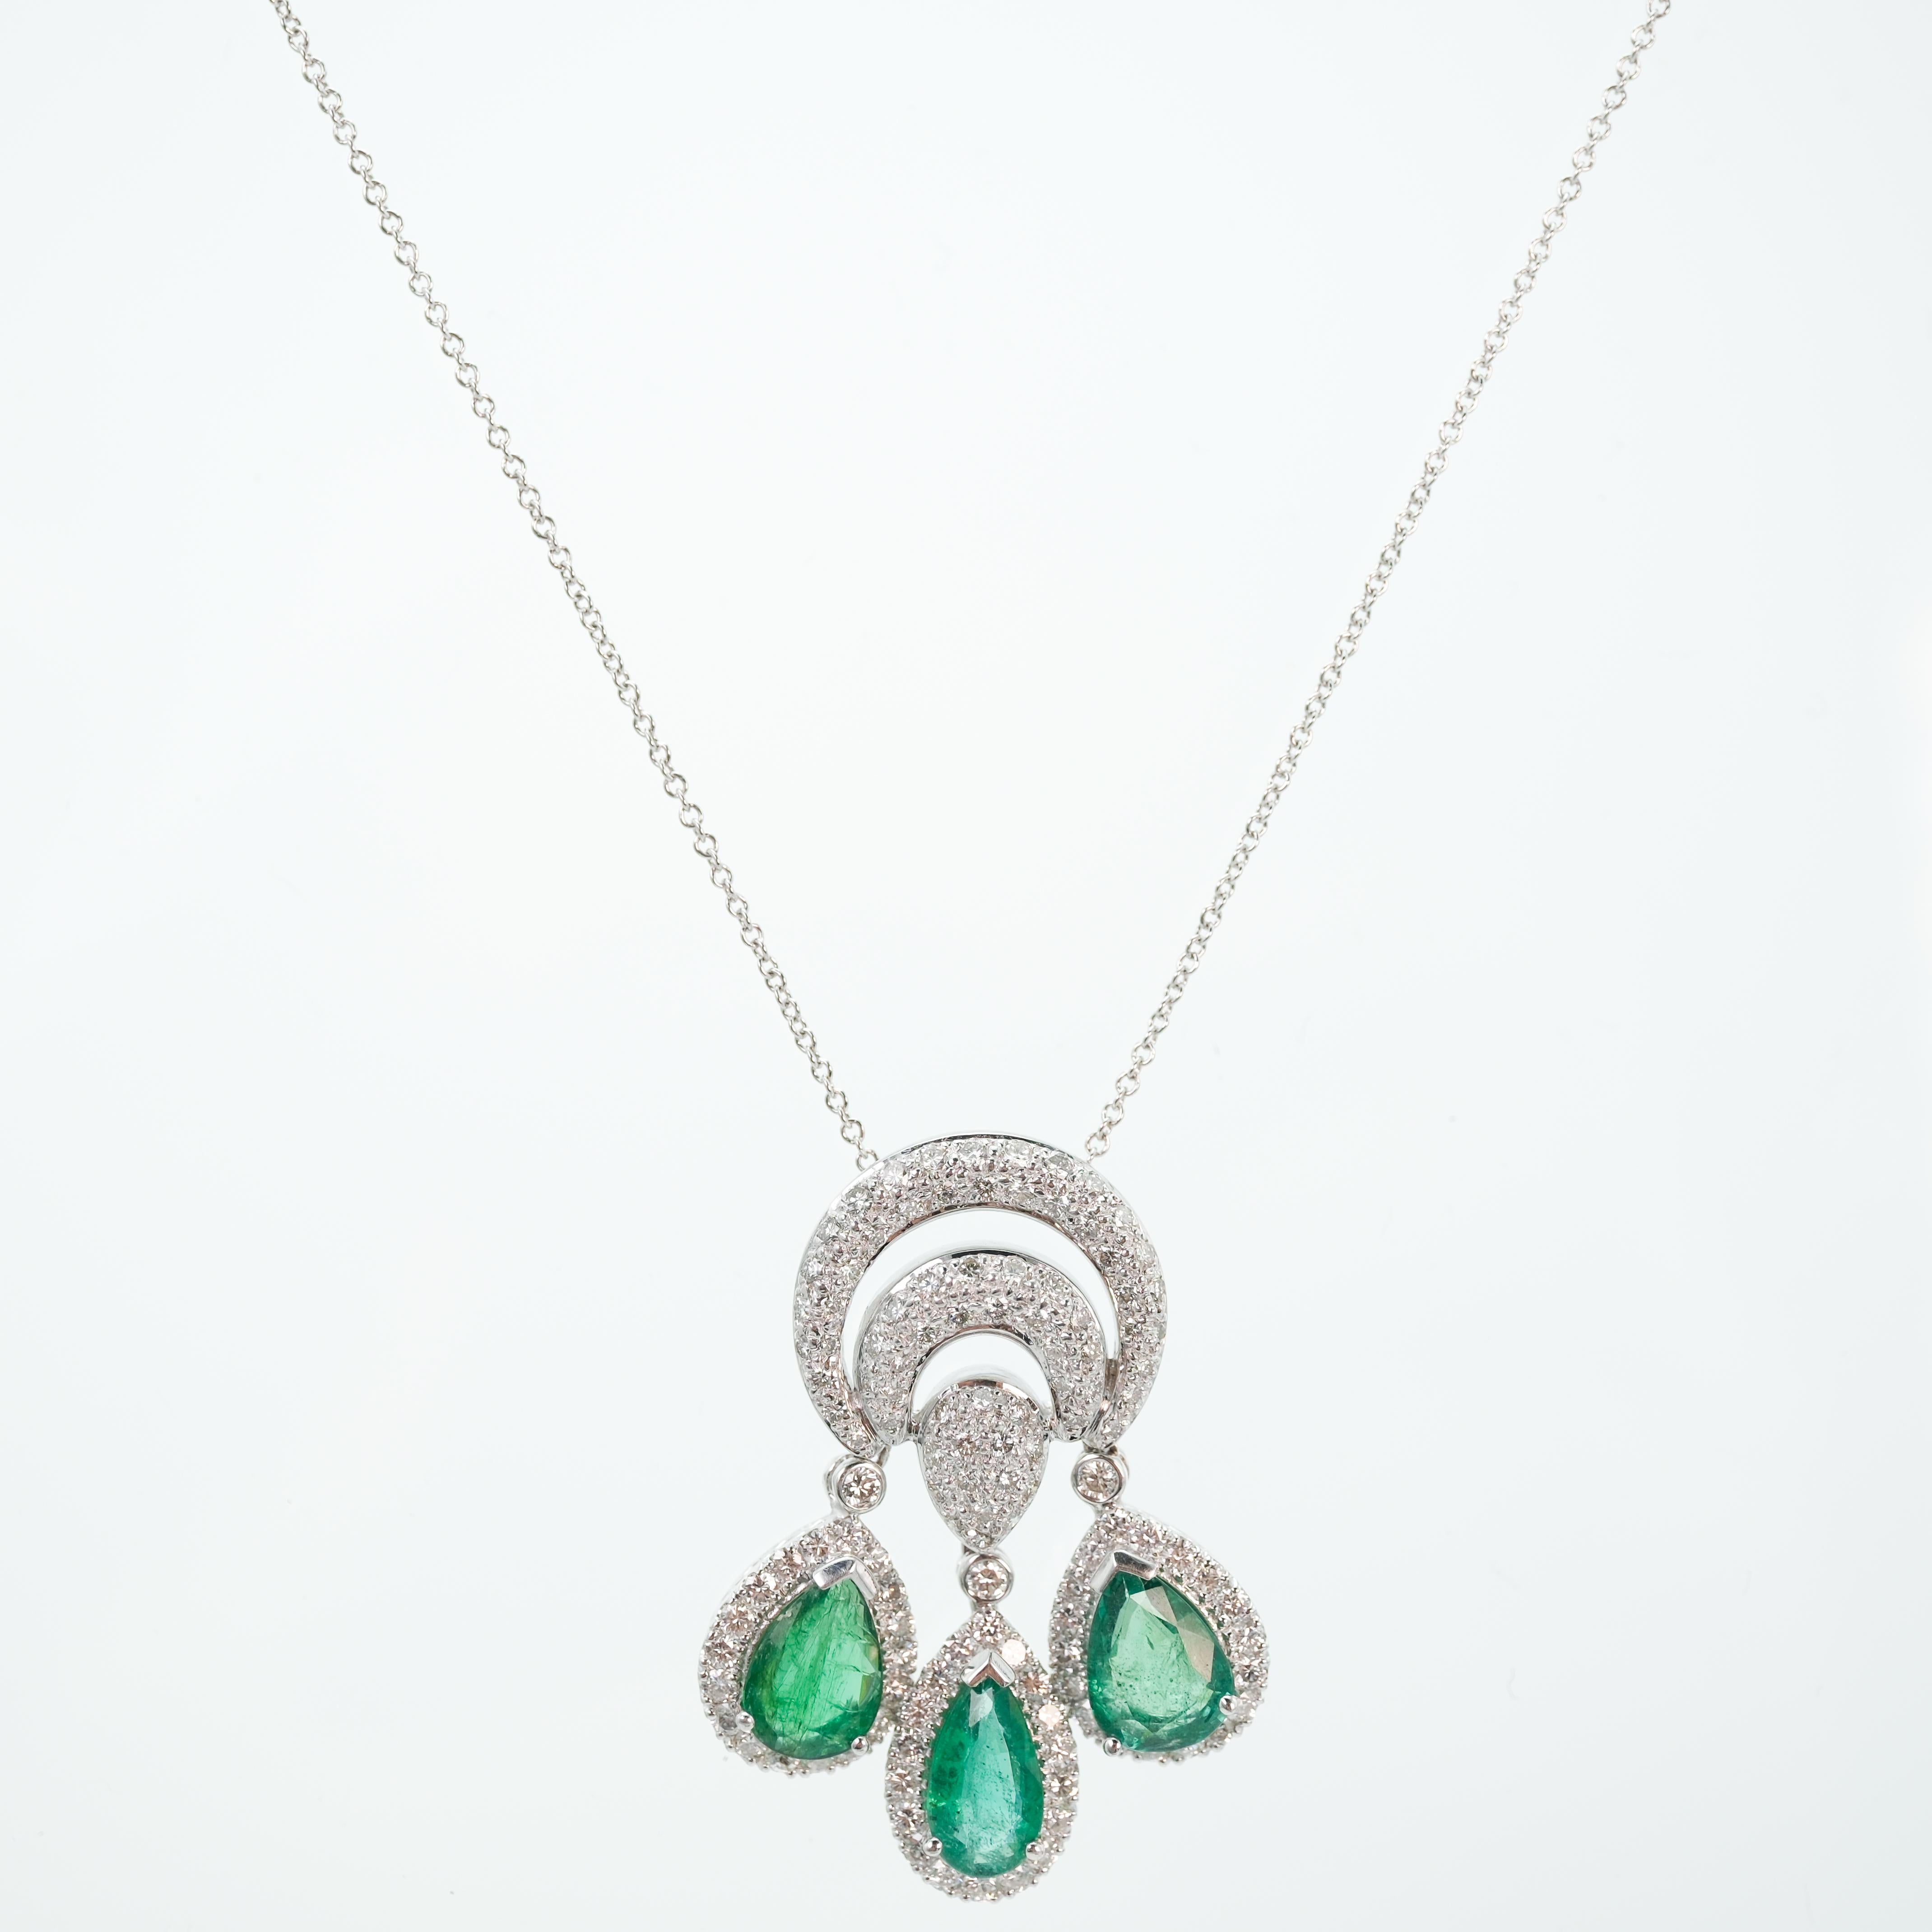 Contemporary Modern 18 Karat White Gold Emerald and Diamond Statement Pendant and Necklace  For Sale